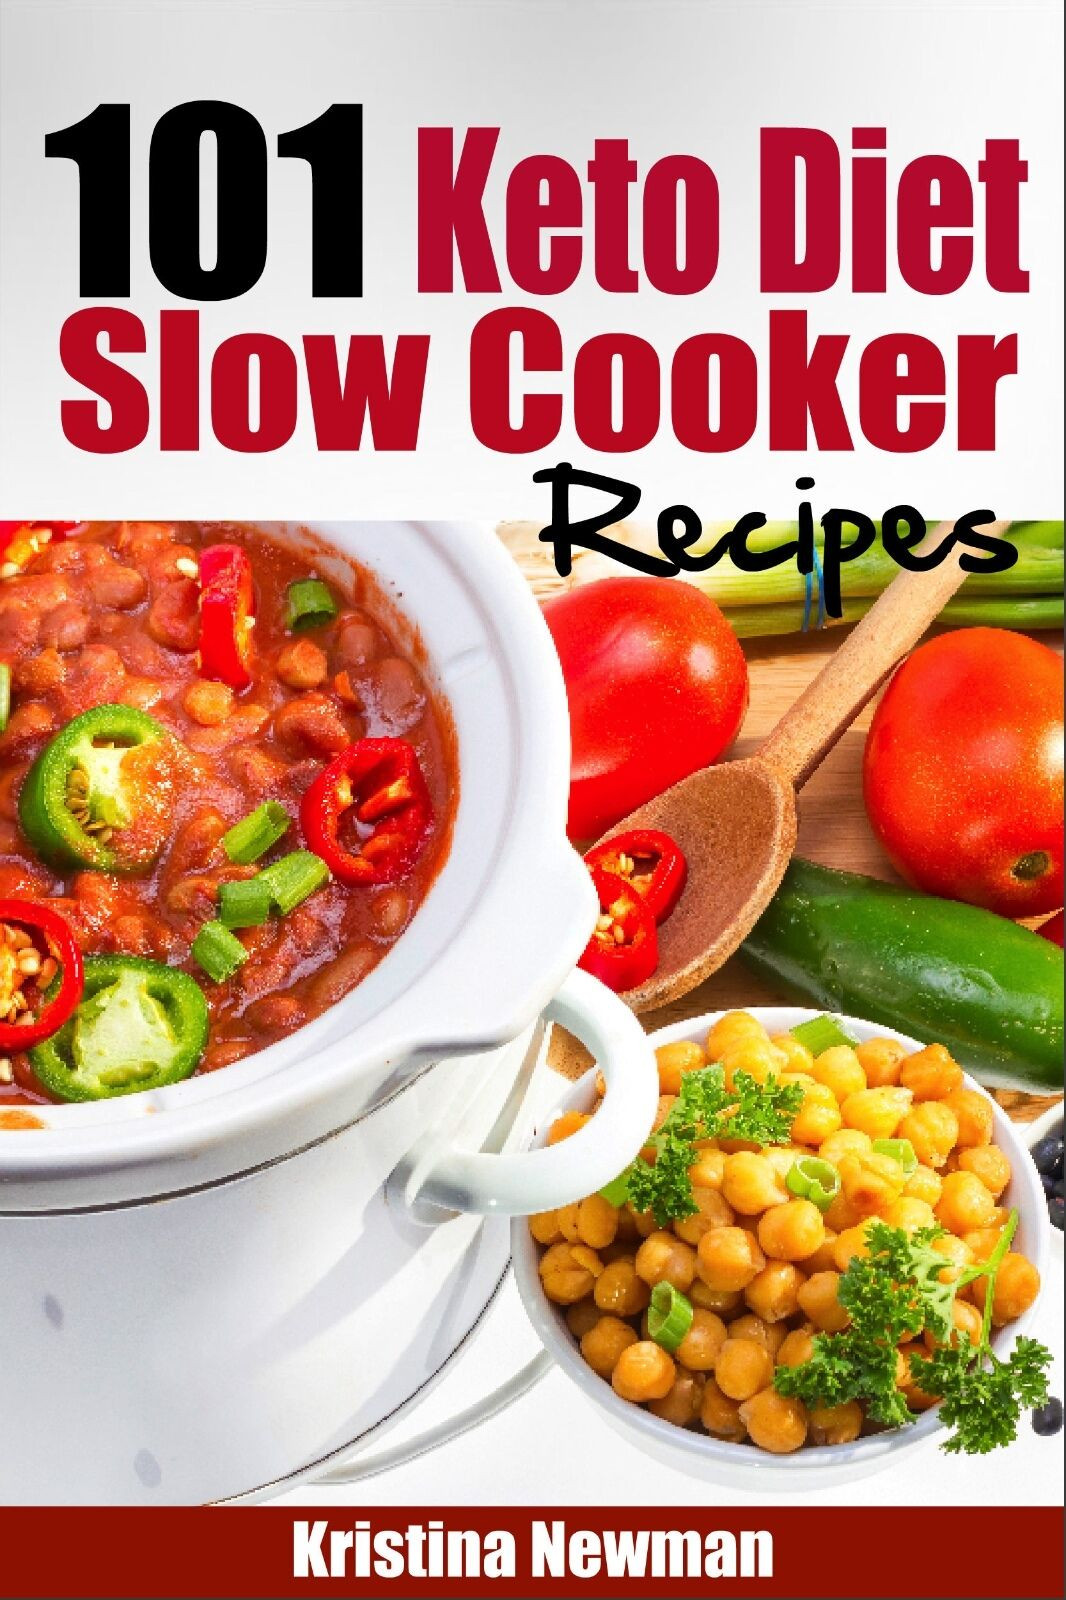 Keto Diet Recipes Slow Cooker
 101 Ketogenic Diet Slow Cooker Recipes Quick & Easy Low